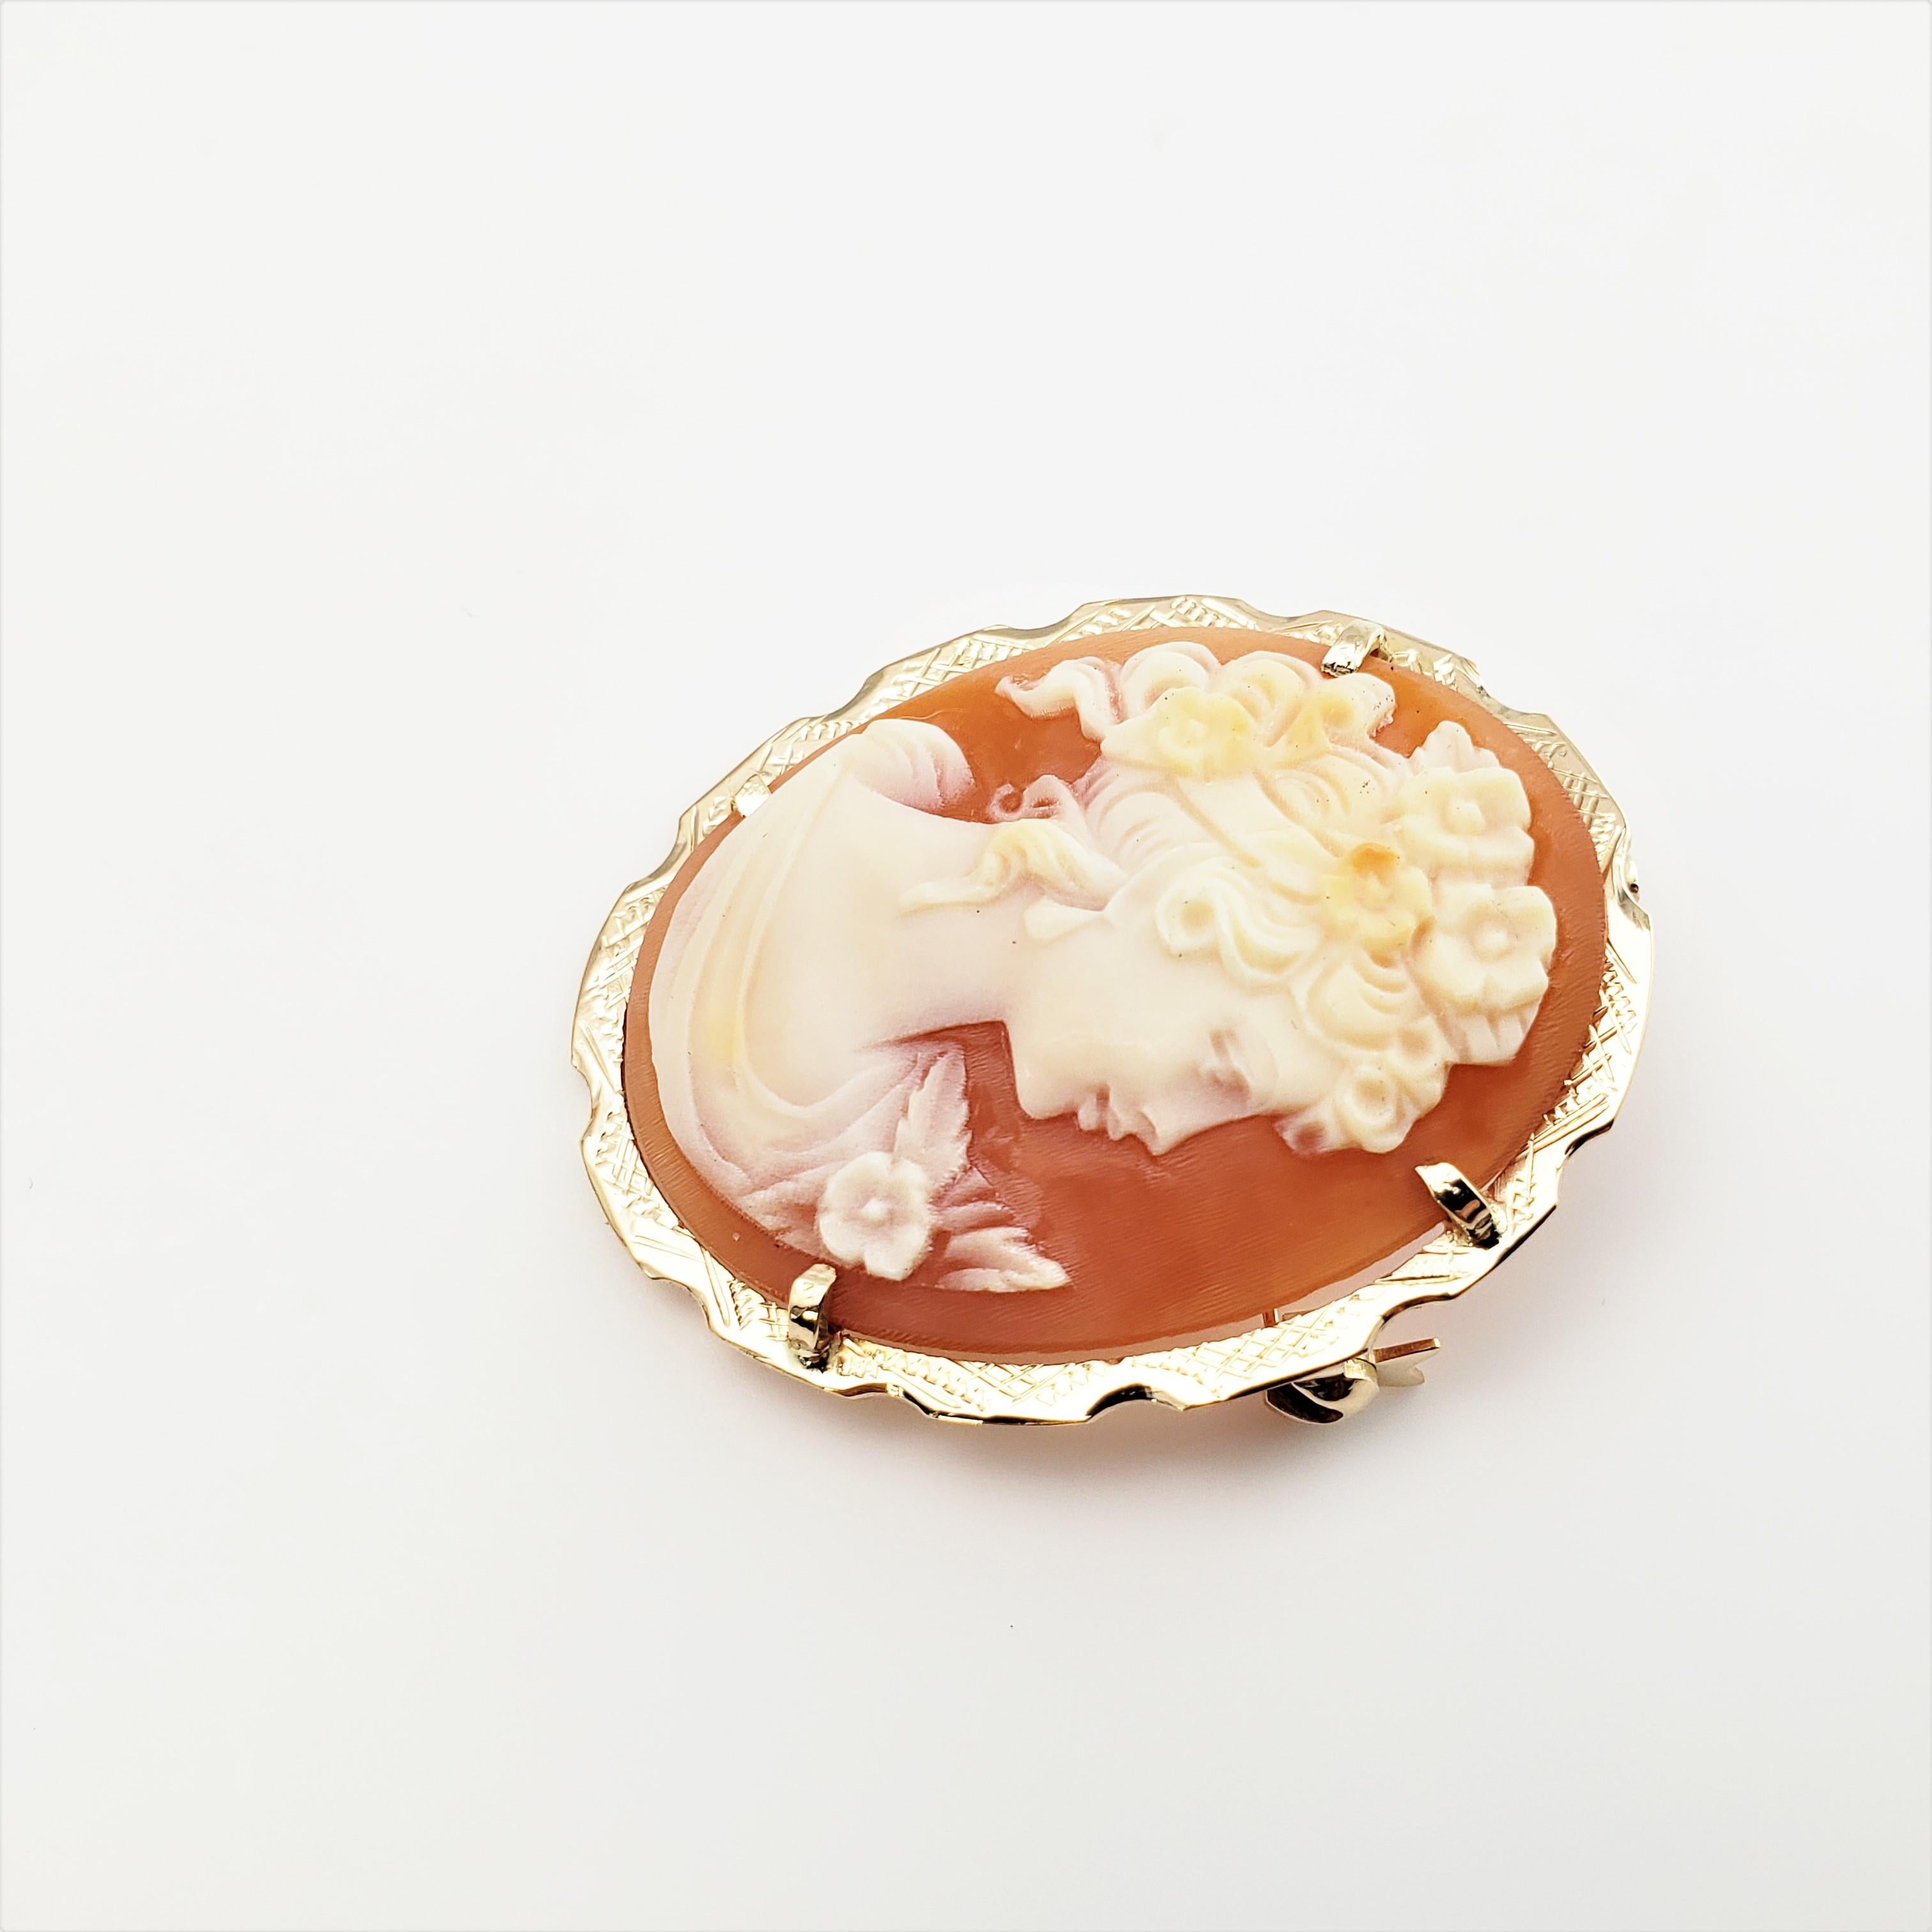 14 Karat Yellow Gold Cameo Brooch/Pendant-

This lovely cameo pendant features a lovely lady in profile set in beautifully detailed 14K yellow gold.  Can be worn a brooch or a pendant.

Size: 1.25 inches x 1 inch

Weight:  2.8 dwt./  4.4